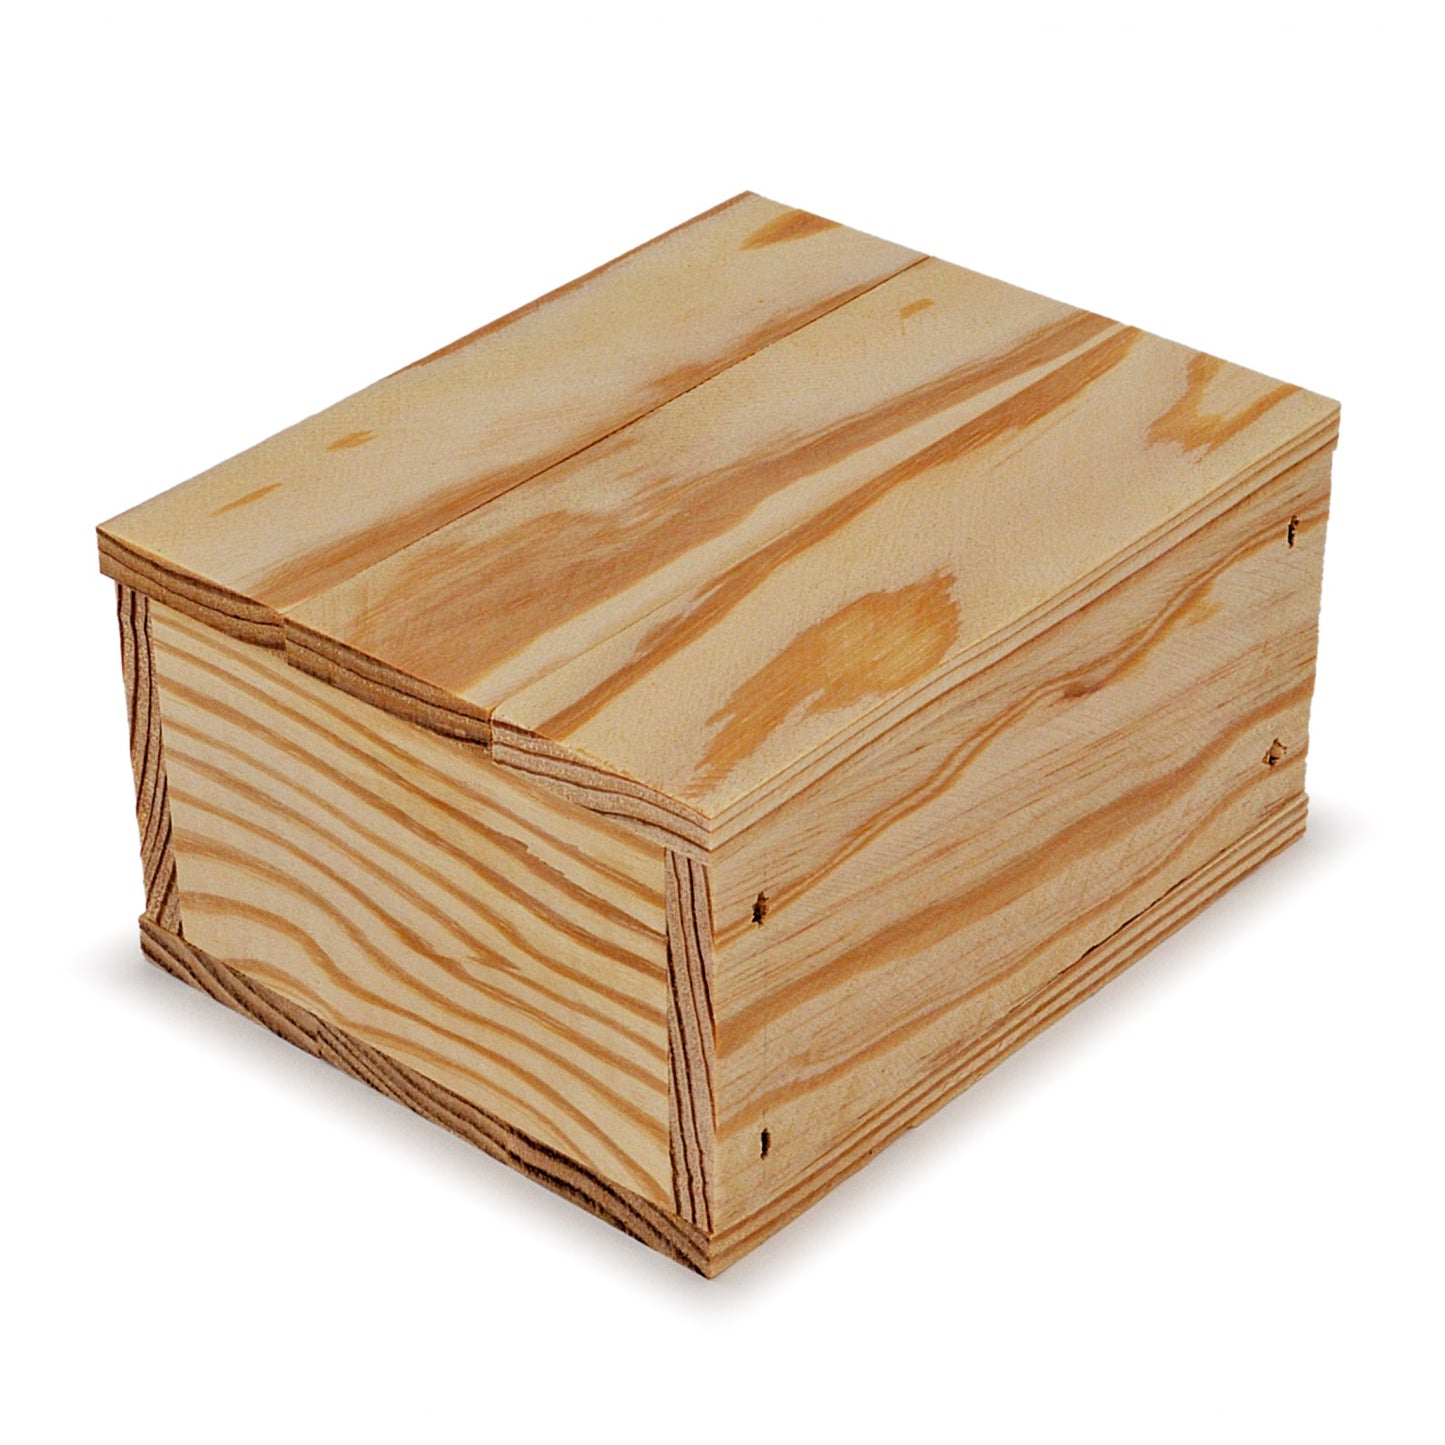 Small wooden crate with lid 5x4.5x2.75, 6-BX-5-4.5-2.75-NX-NW-LL, 12-BX-5-4.5-2.75-NX-NW-LL, 24-BX-5-4.5-2.75-NX-NW-LL, 48-BX-5-4.5-2.75-NX-NW-LL, 96-BX-5-4.5-2.75-NX-NW-LL